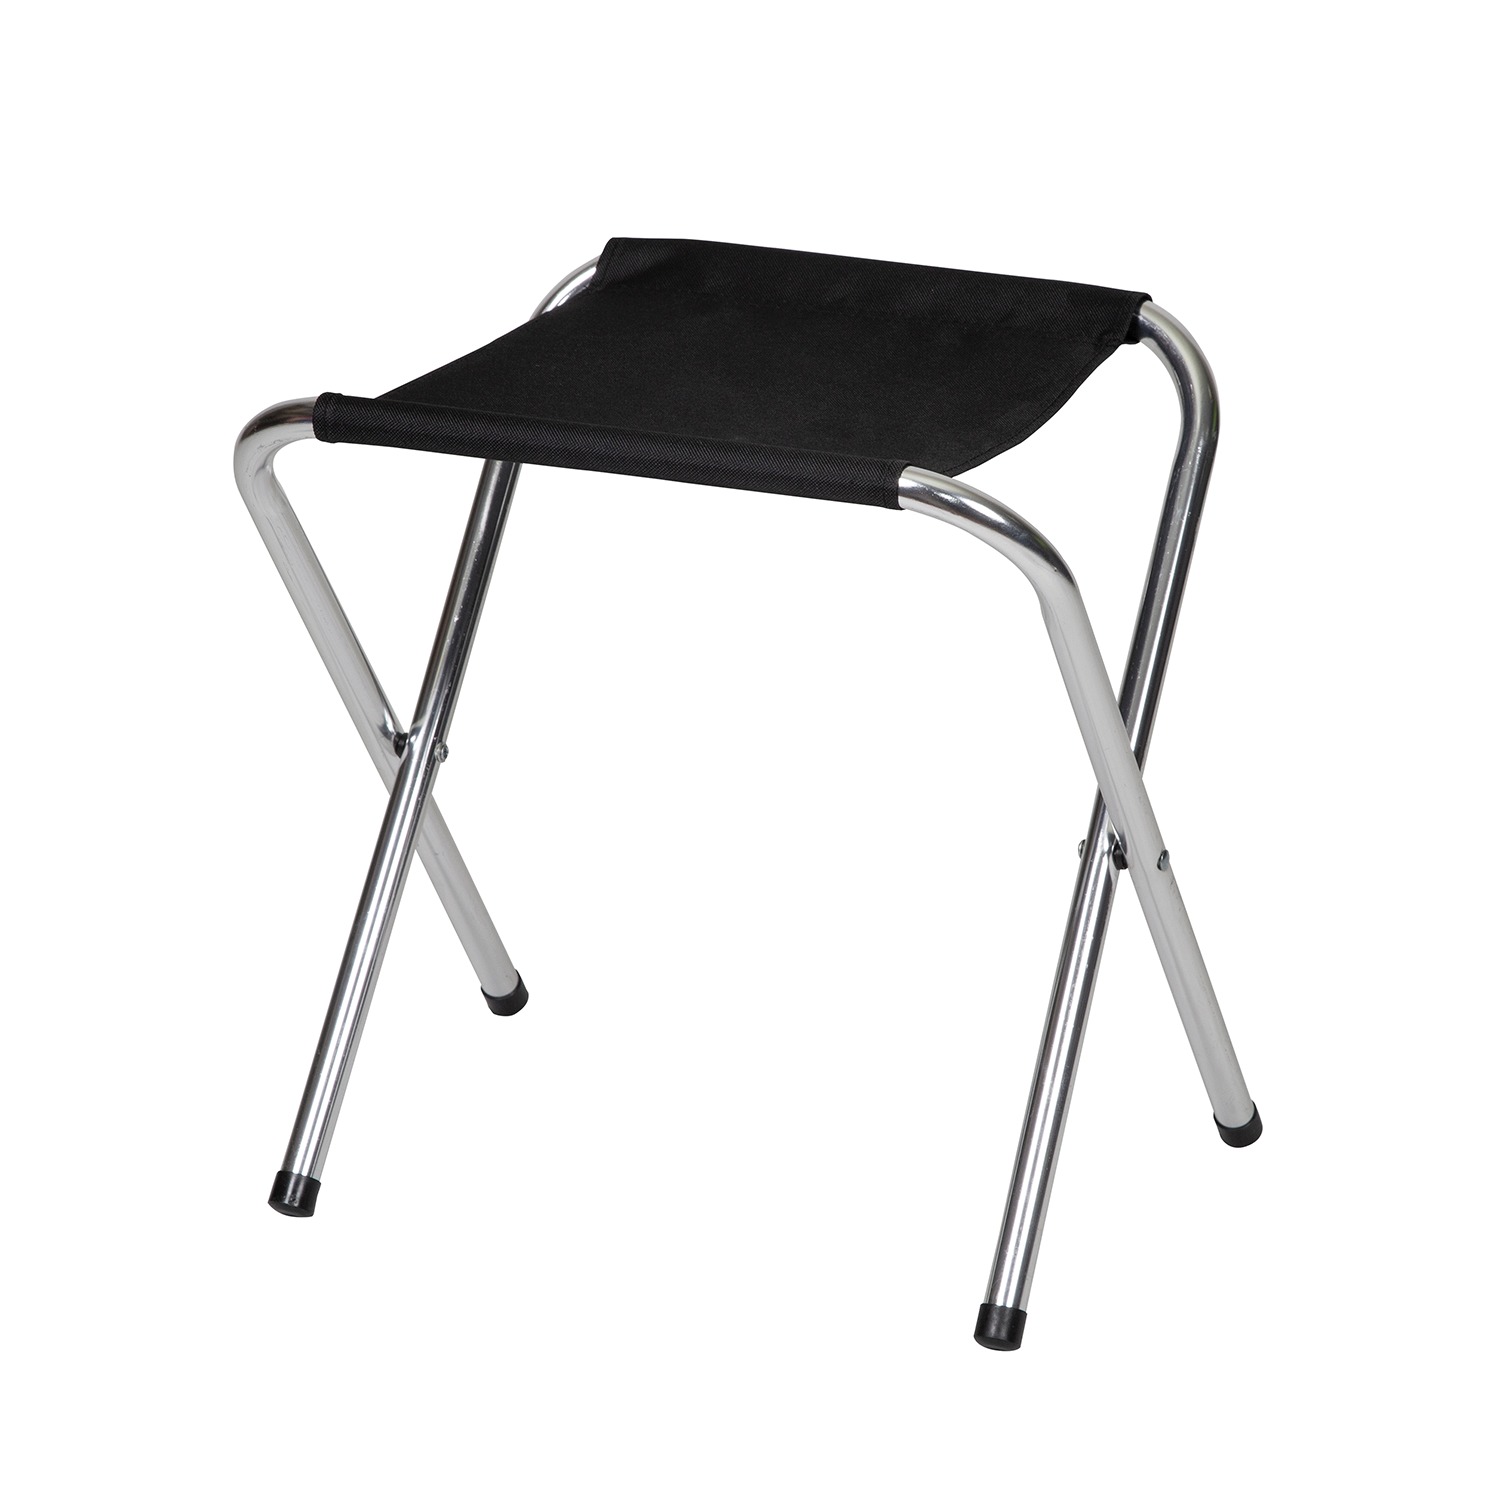 Stansport Camping Table Black Polyester 15.7" L x 12.8" W x 15" H - image 3 of 11